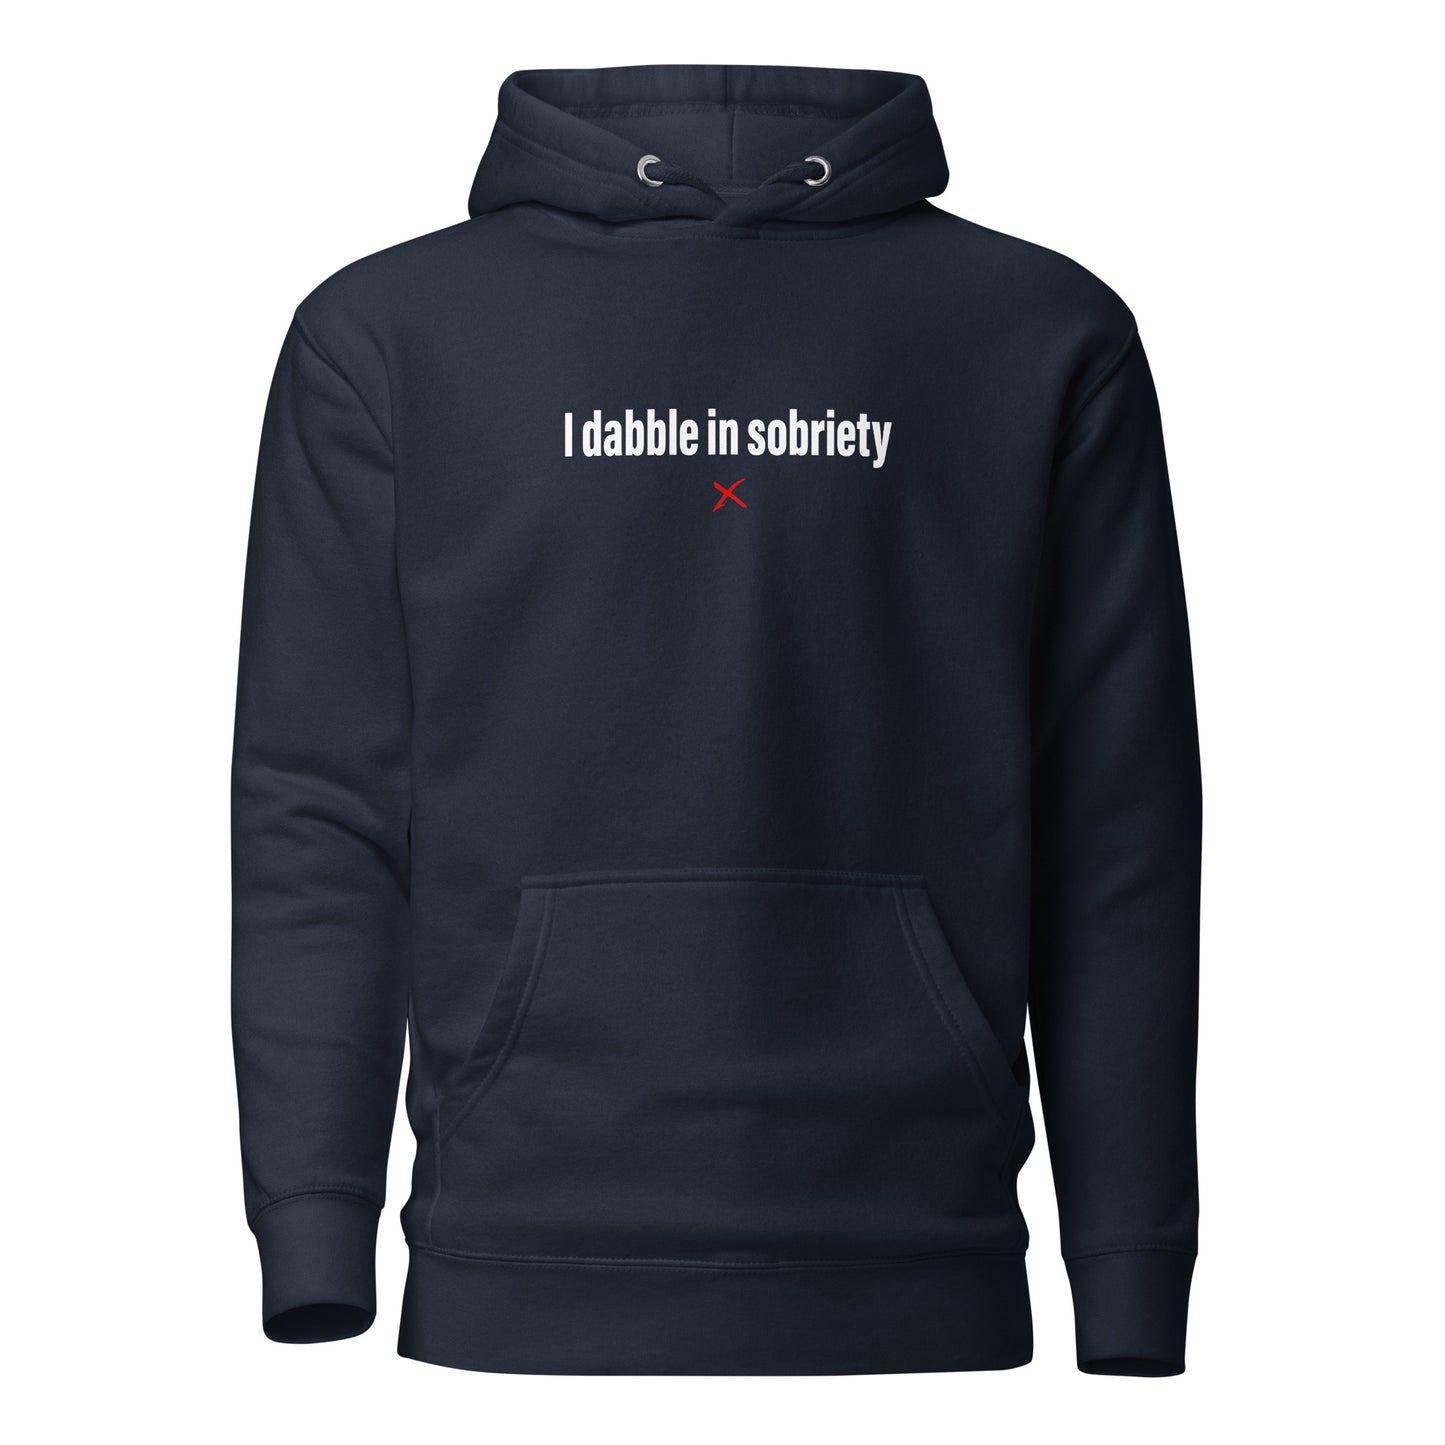 I dabble in sobriety - Hoodie